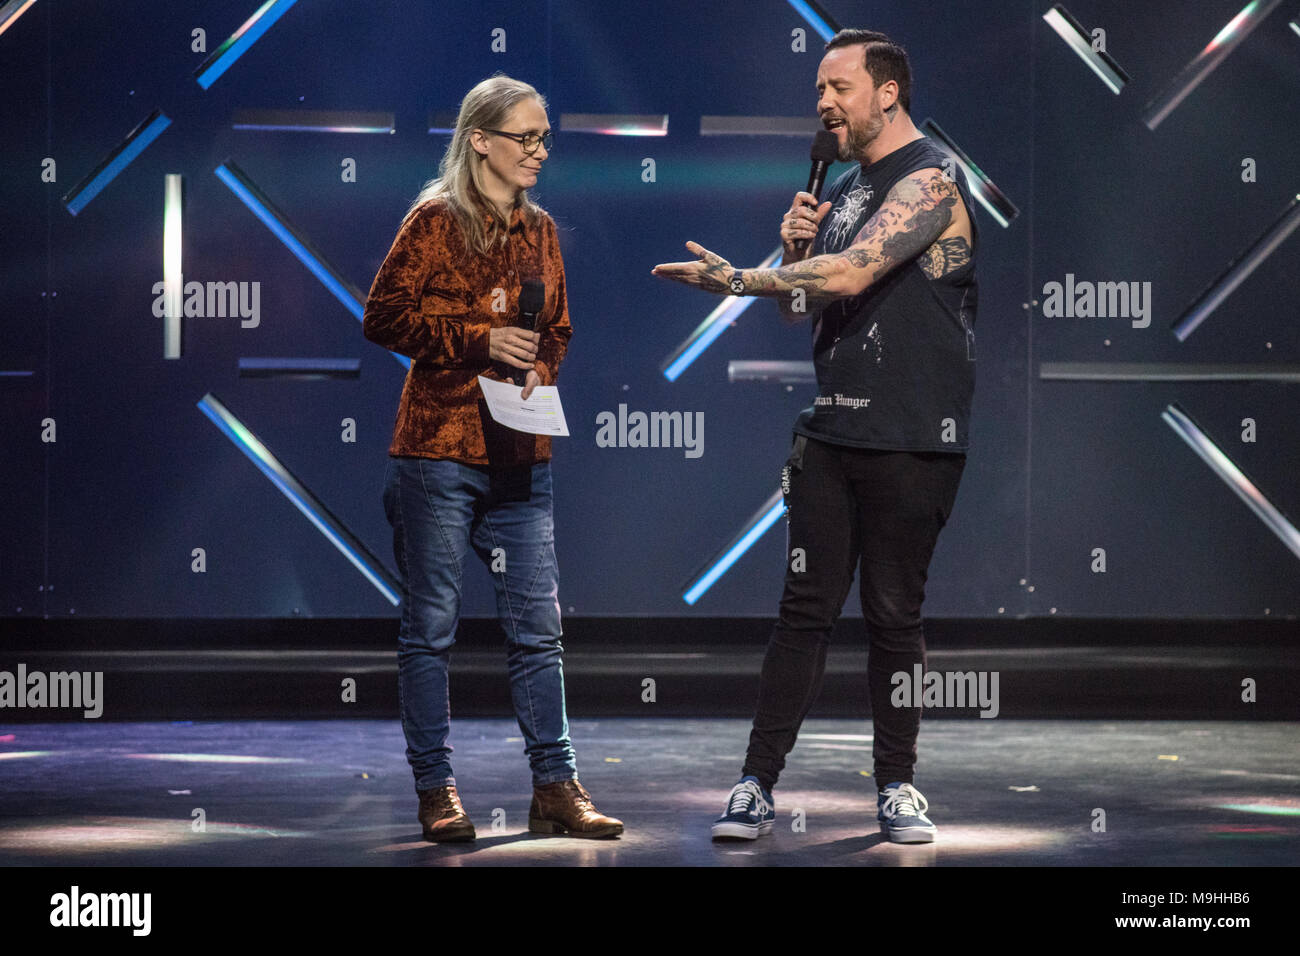 Norway, Oslo - February 25, 2018. The Norwegian musician Tarjei Strøm is hosting the Norwegian Grammy Awards, Spellemannprisen 2017, at Oslo Konserthus in Oslo. Here he is seen with May-Irene Aasen (L). (Photo credit: Gonzales Photo - Stian S. Moller). Stock Photo